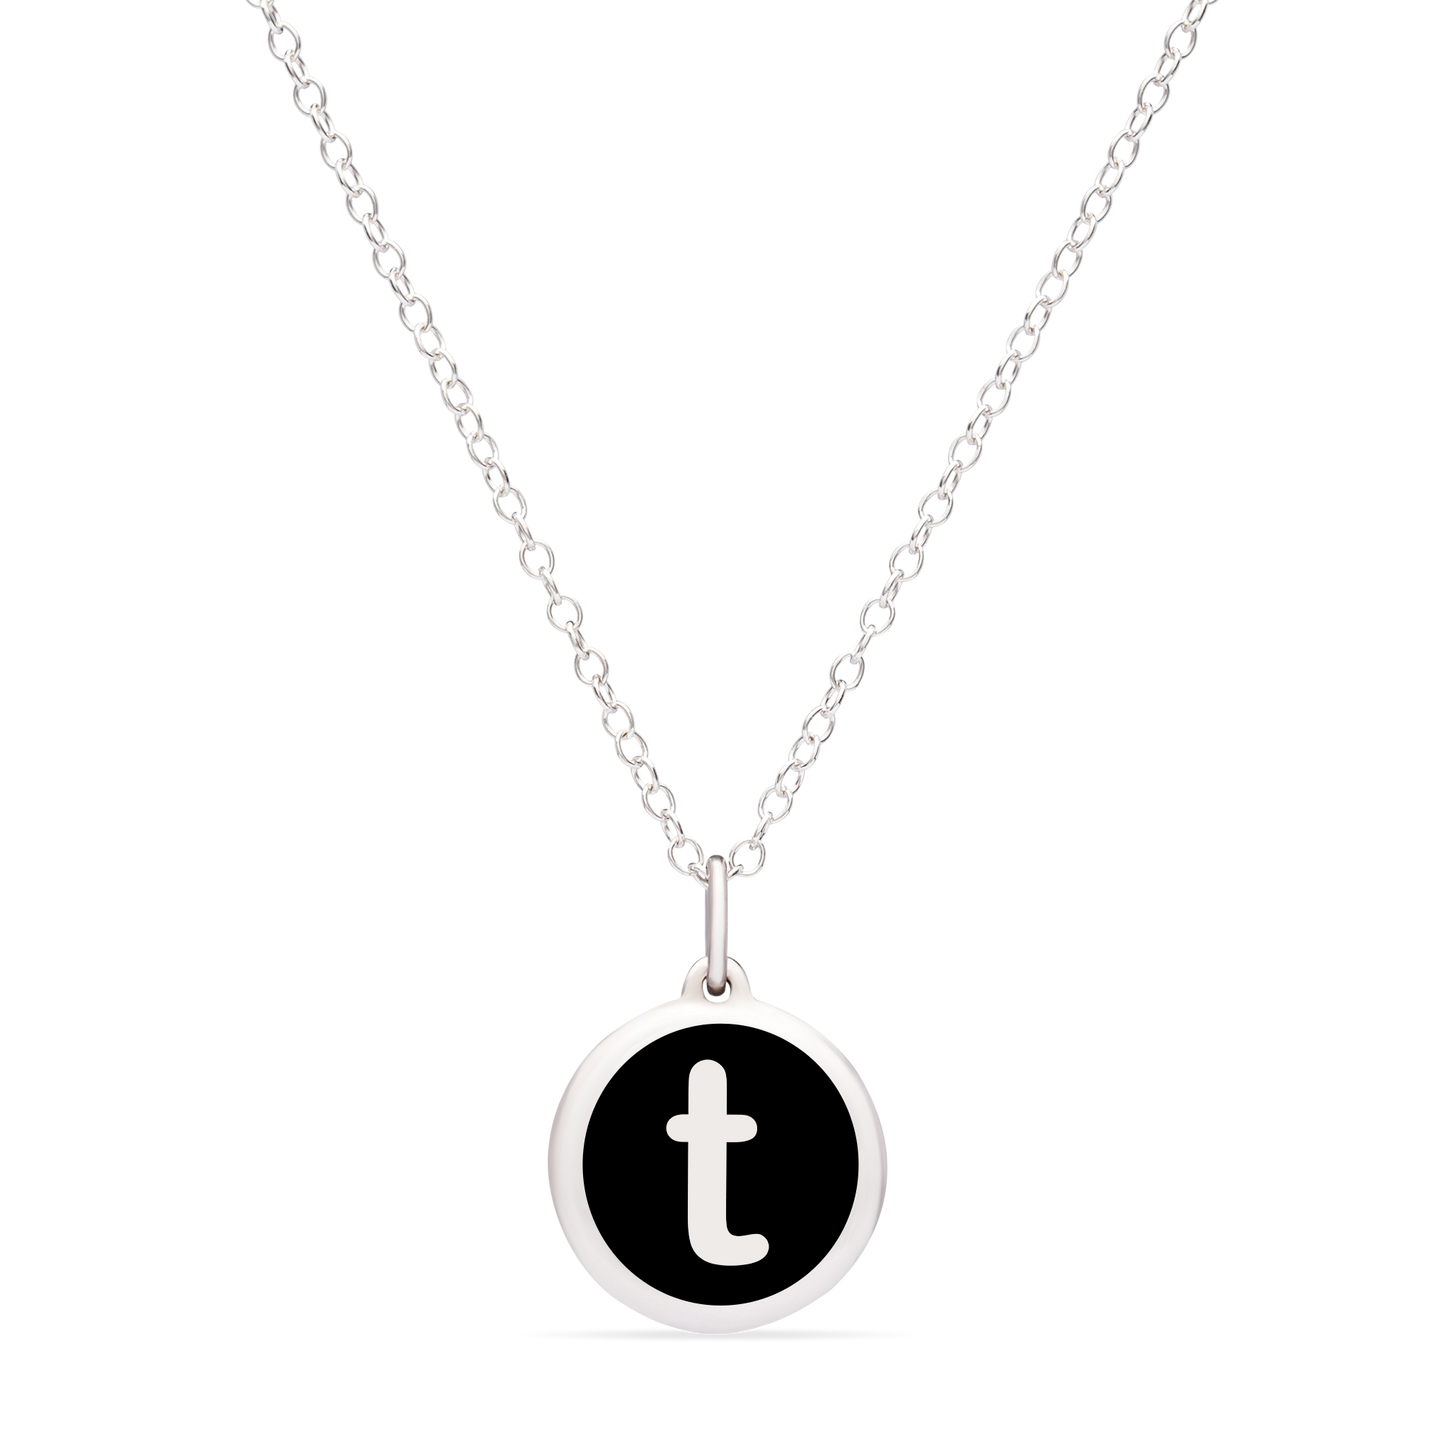 MINI INITIAL 't' CHARM sterling silver with rhodium plate